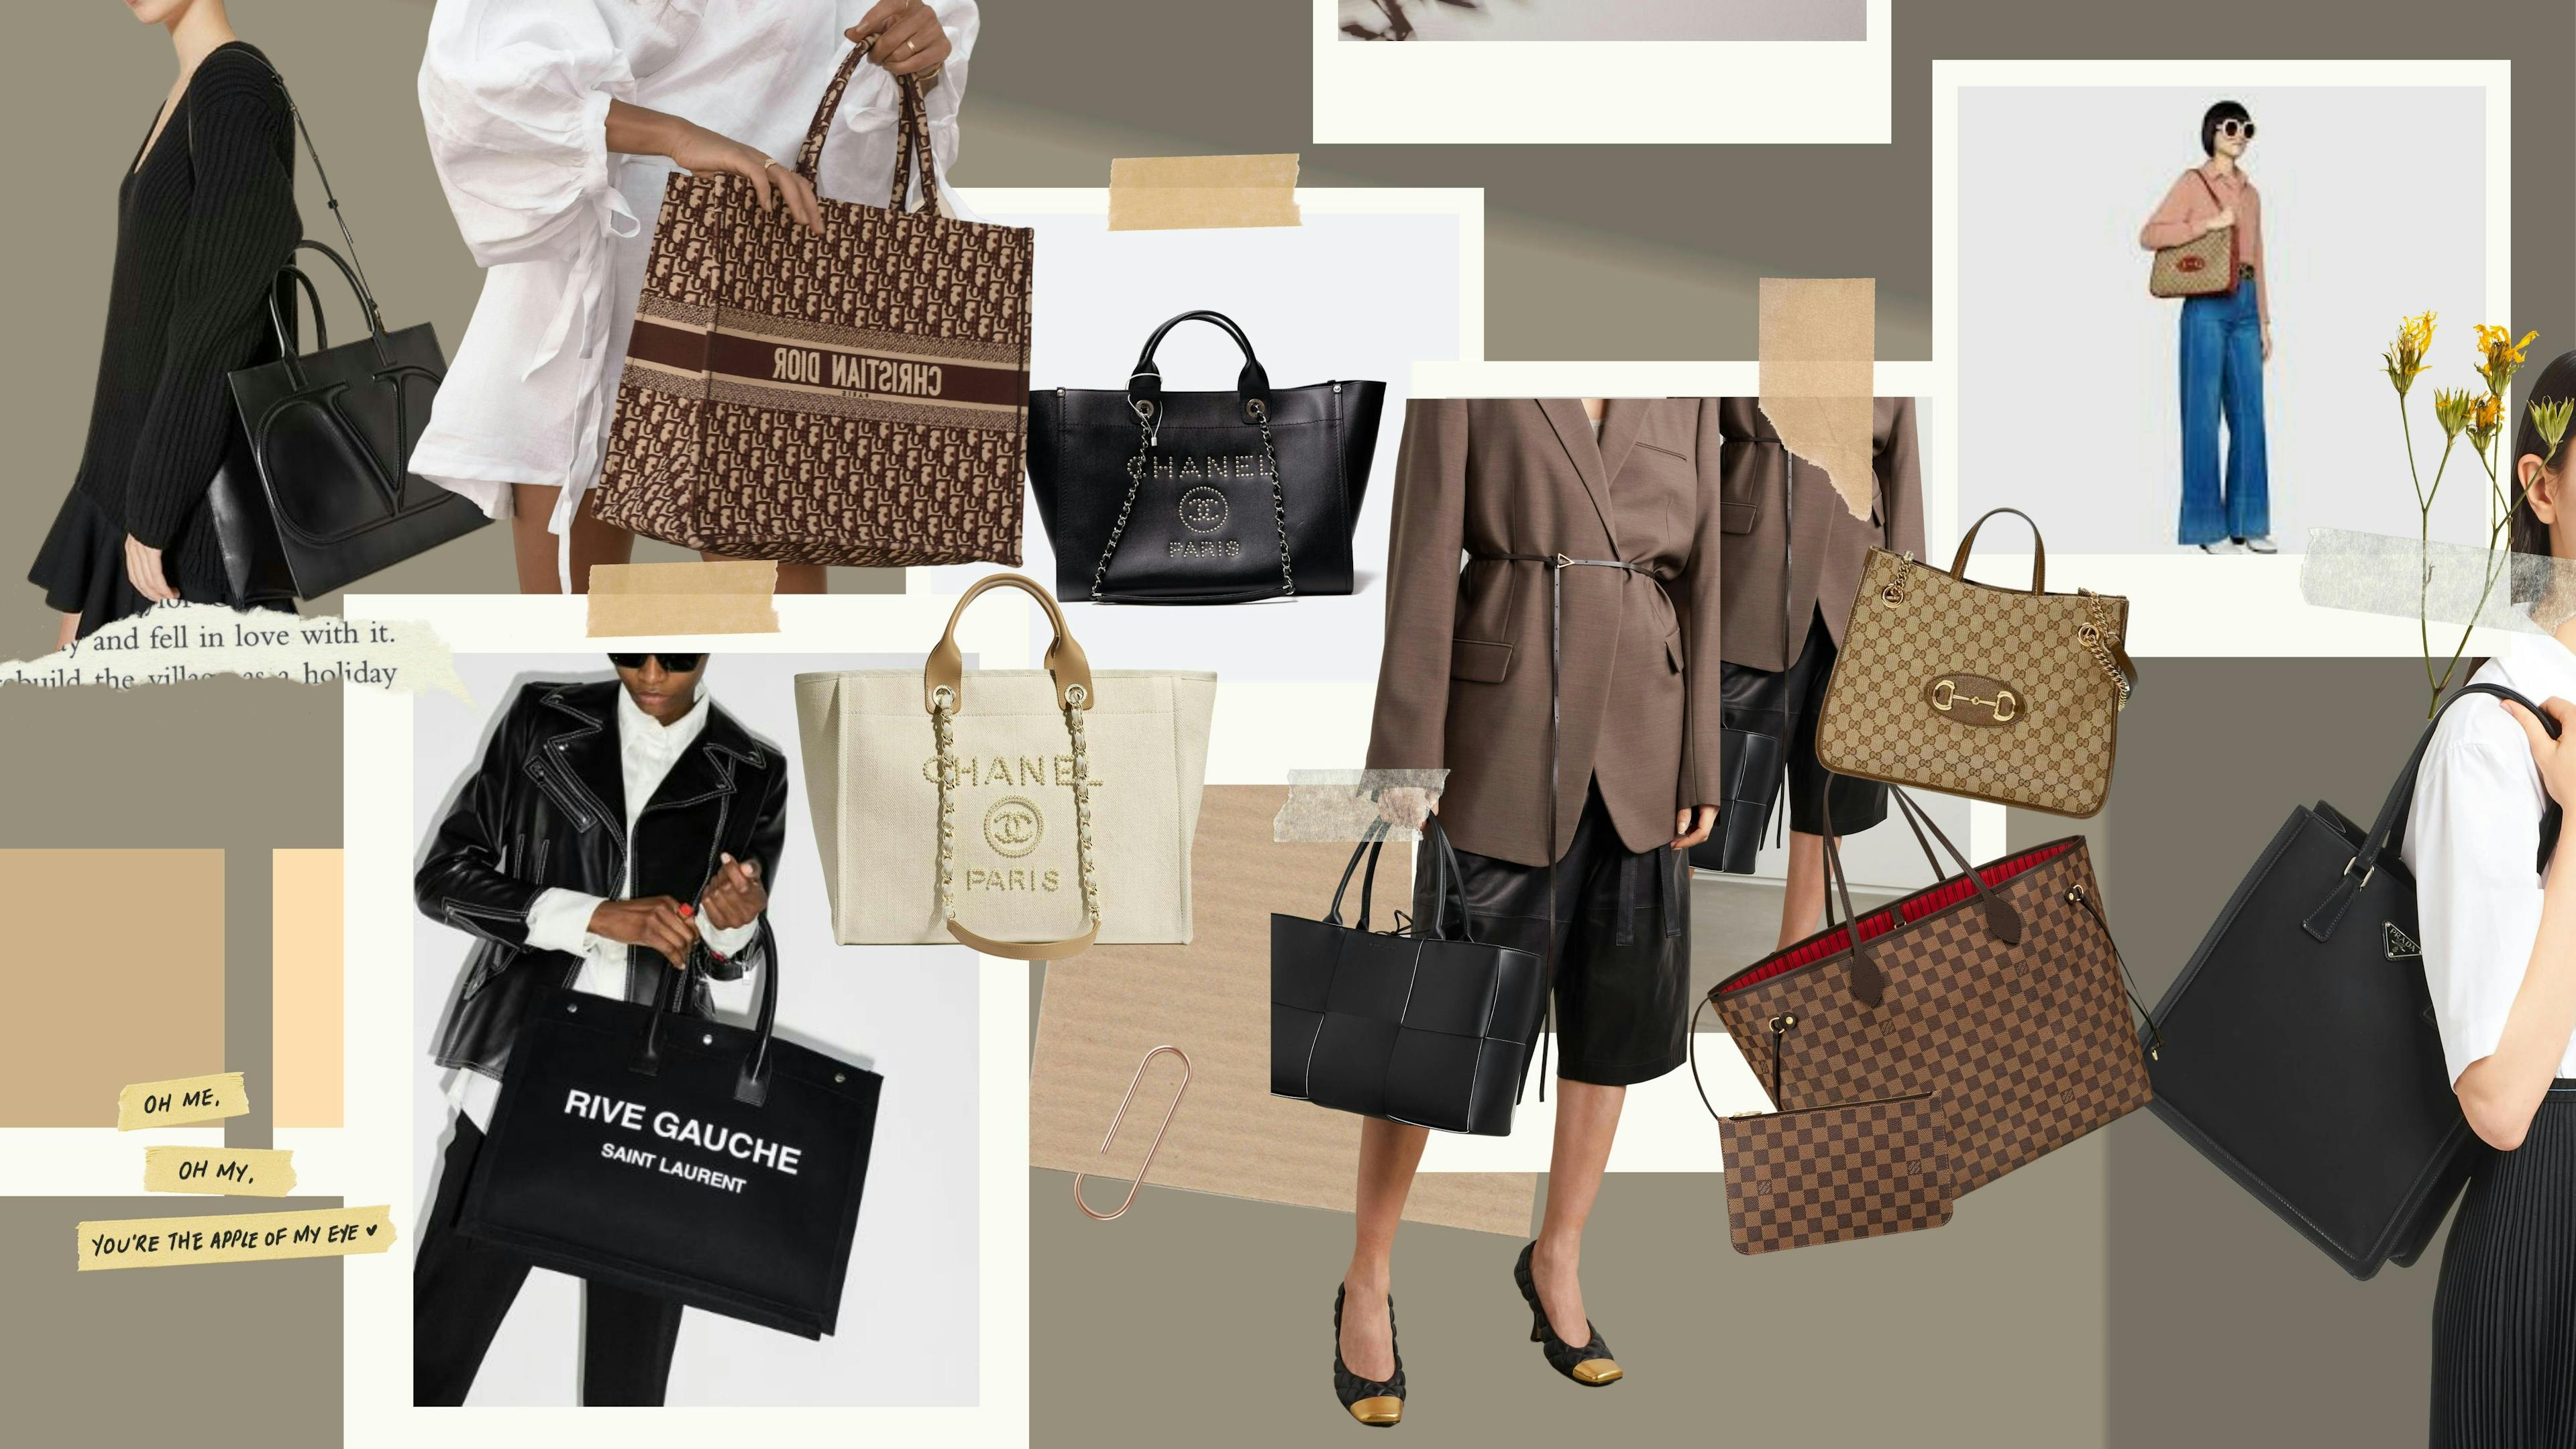 Collage of different designer totes including Saint Laurent, Louis Vuitton, Christian Dior and Chanel.